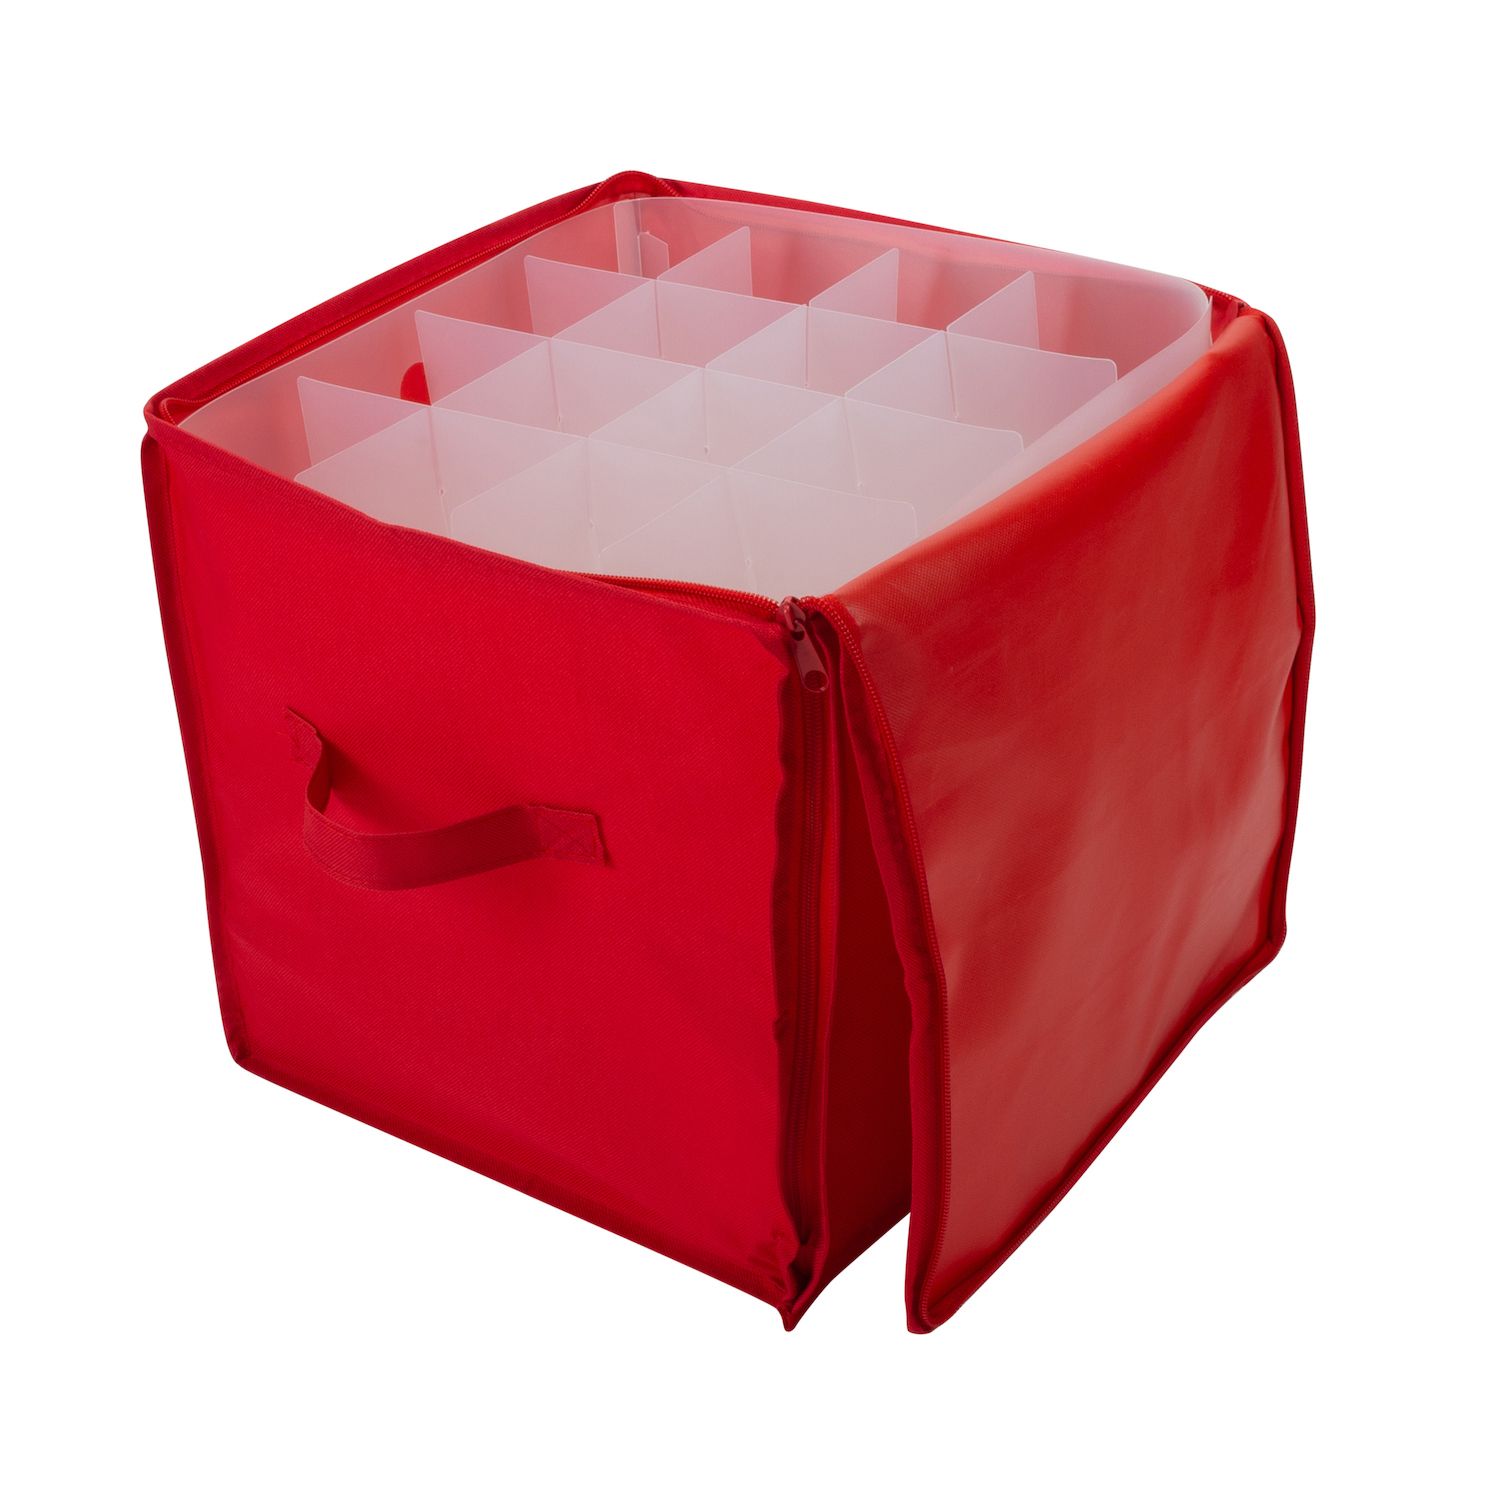 Sterilite Christmas 20 Ornament Storage Container Red Plastic Stackable